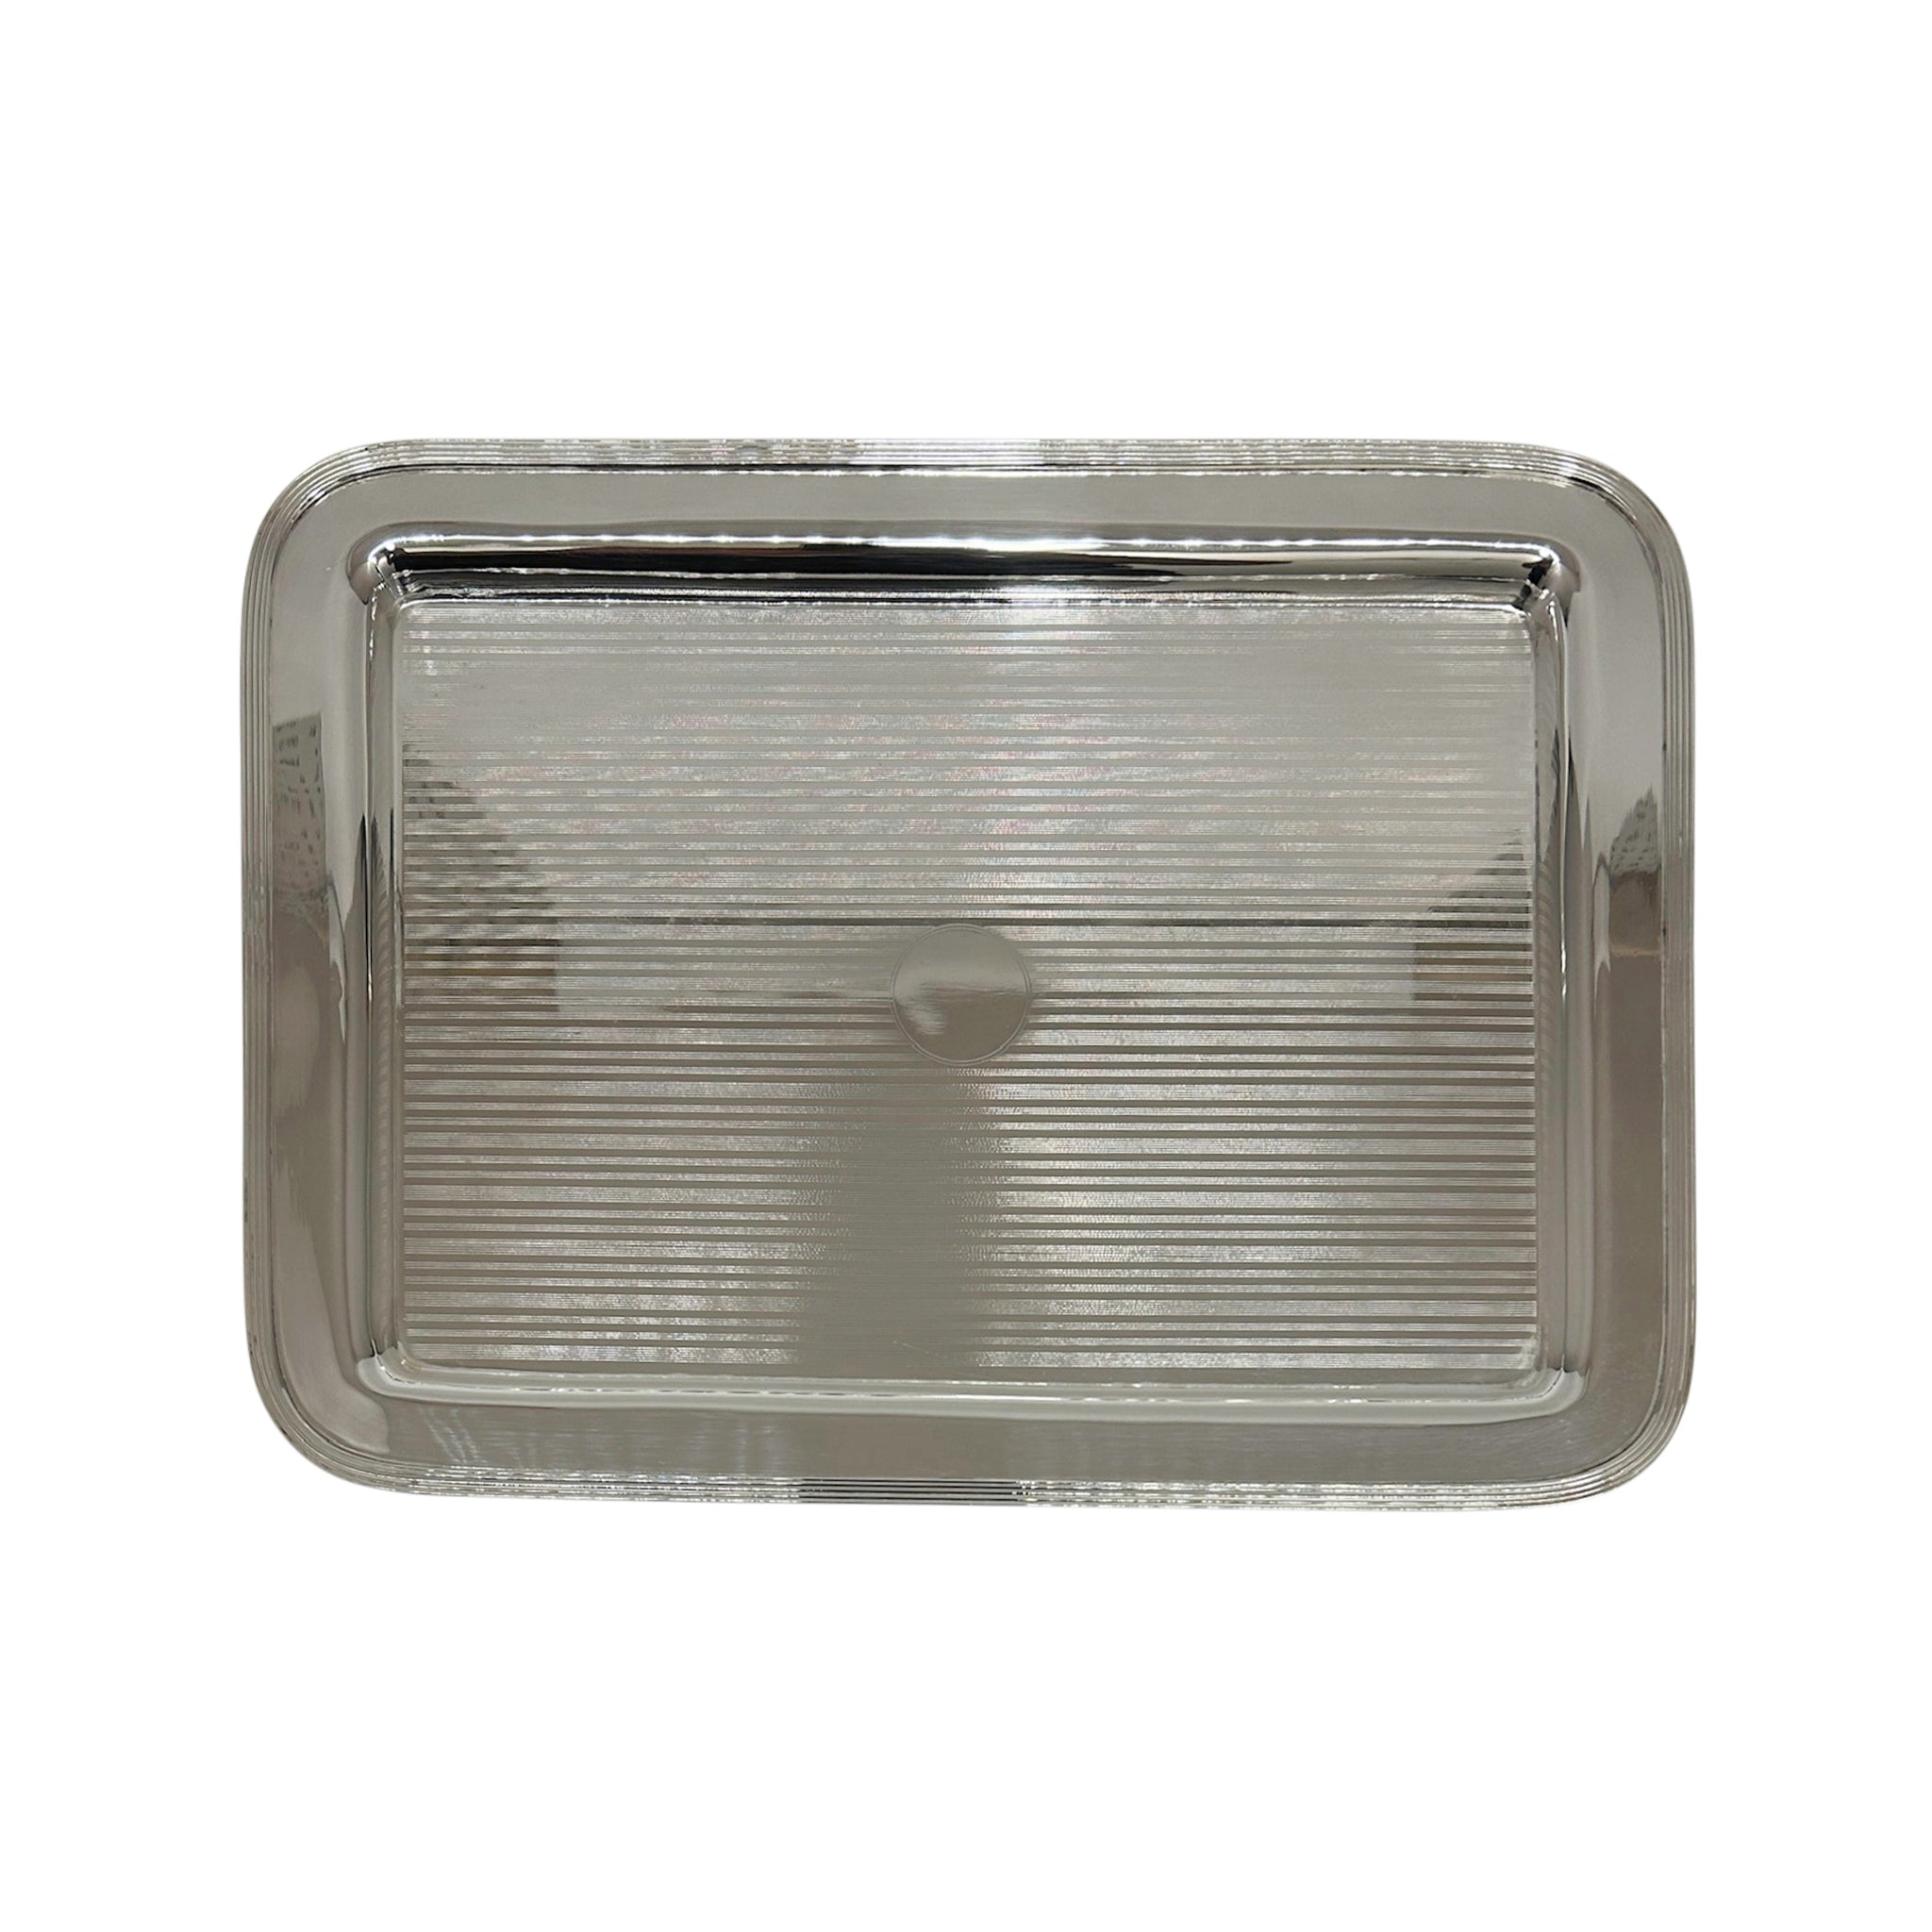 Vintage Oblong Engine-Turned Tray with Round Badge